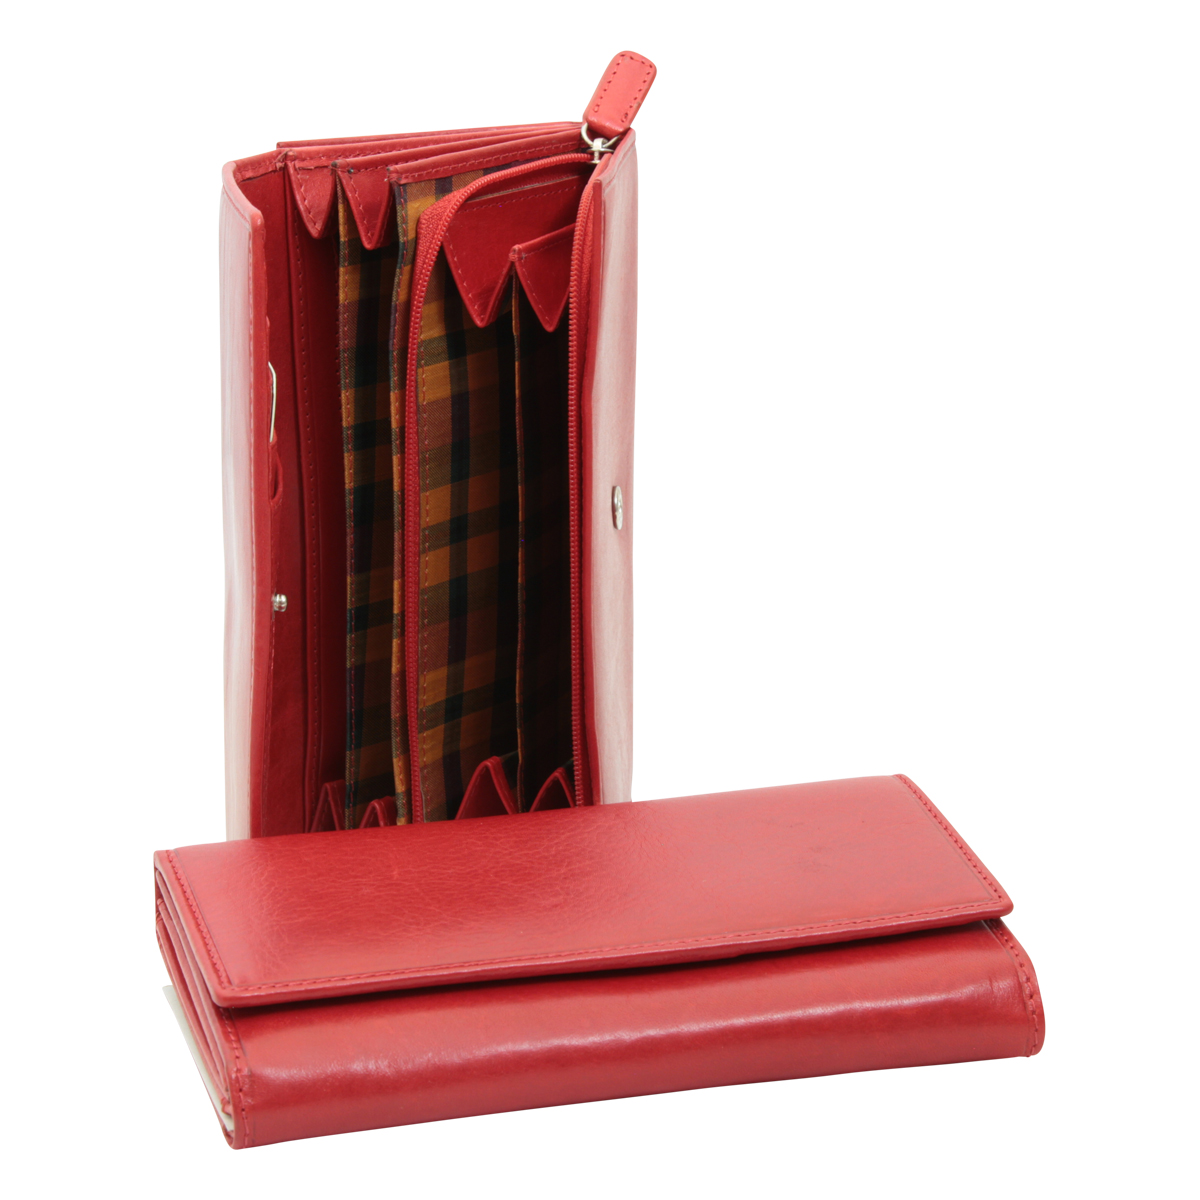 Women's leather wallet - red | 503289RO | EURO | Old Angler Firenze